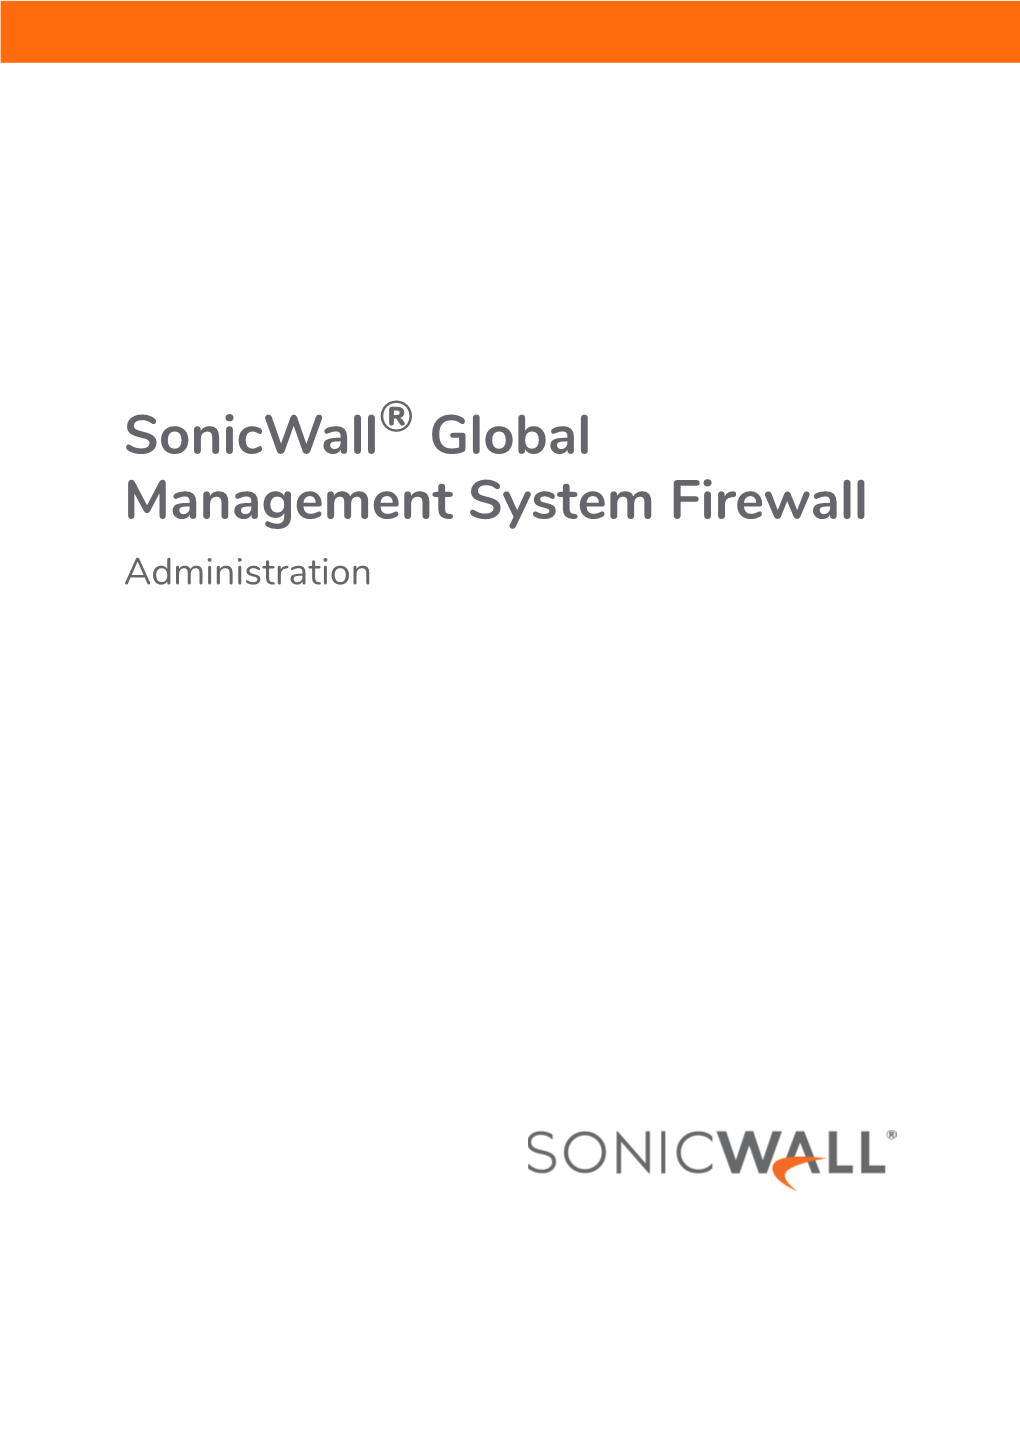 Sonicwall® Global Management System Firewall Administration Contents 1